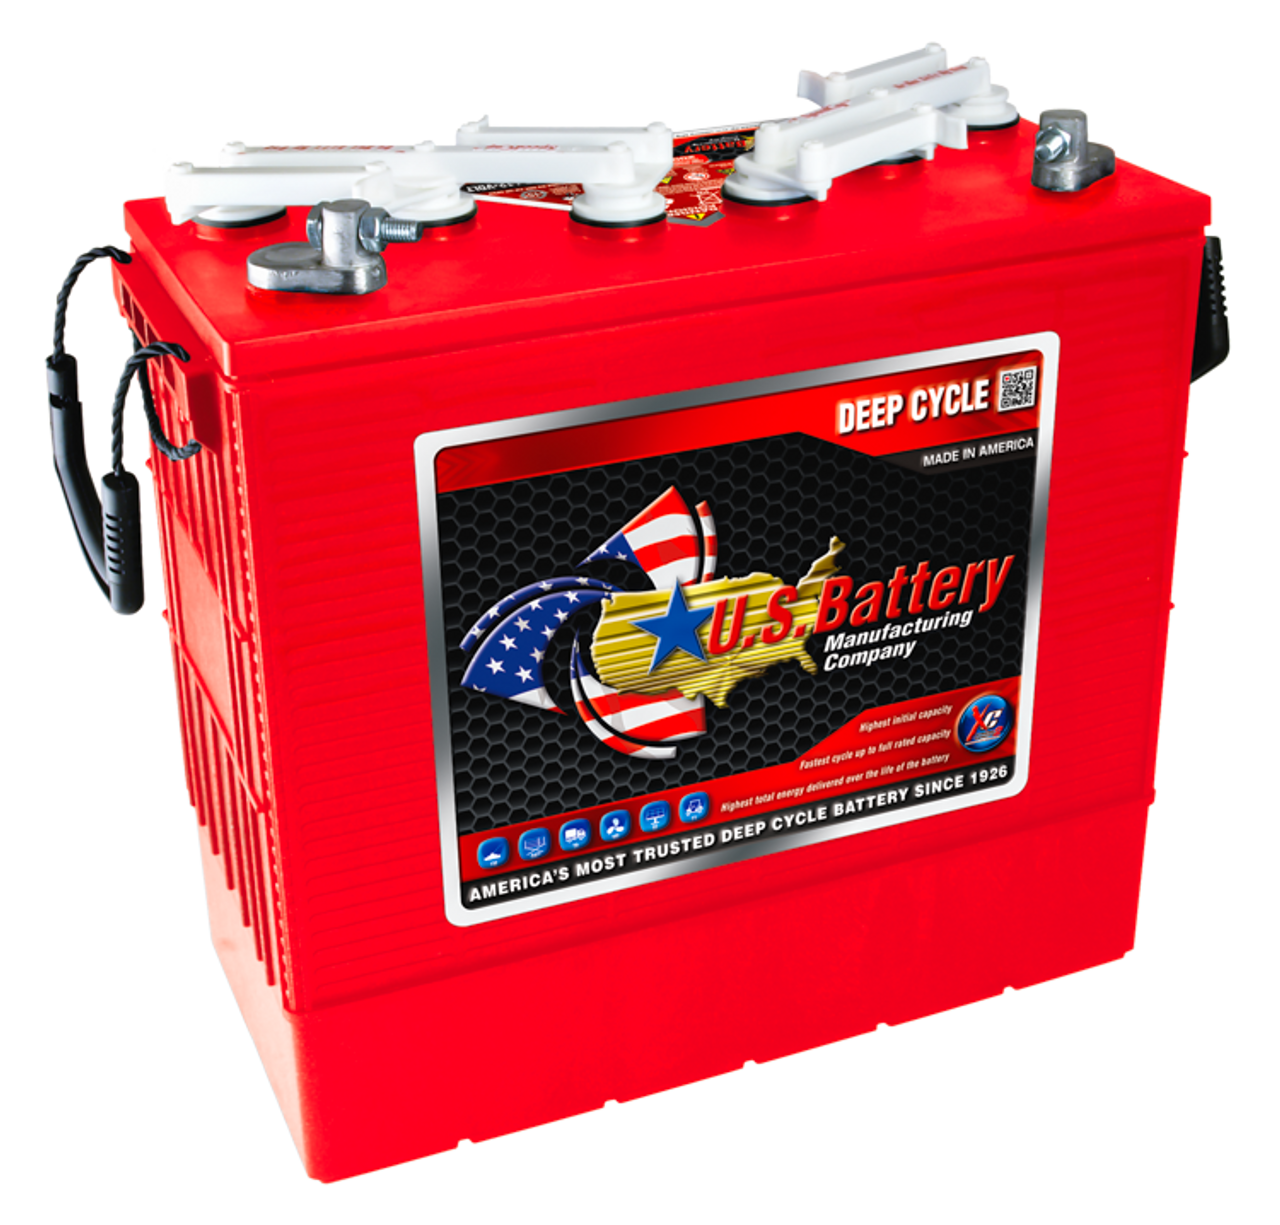 US Battery US185HCXC2 Group 924-J185 Deep Cycle Battery